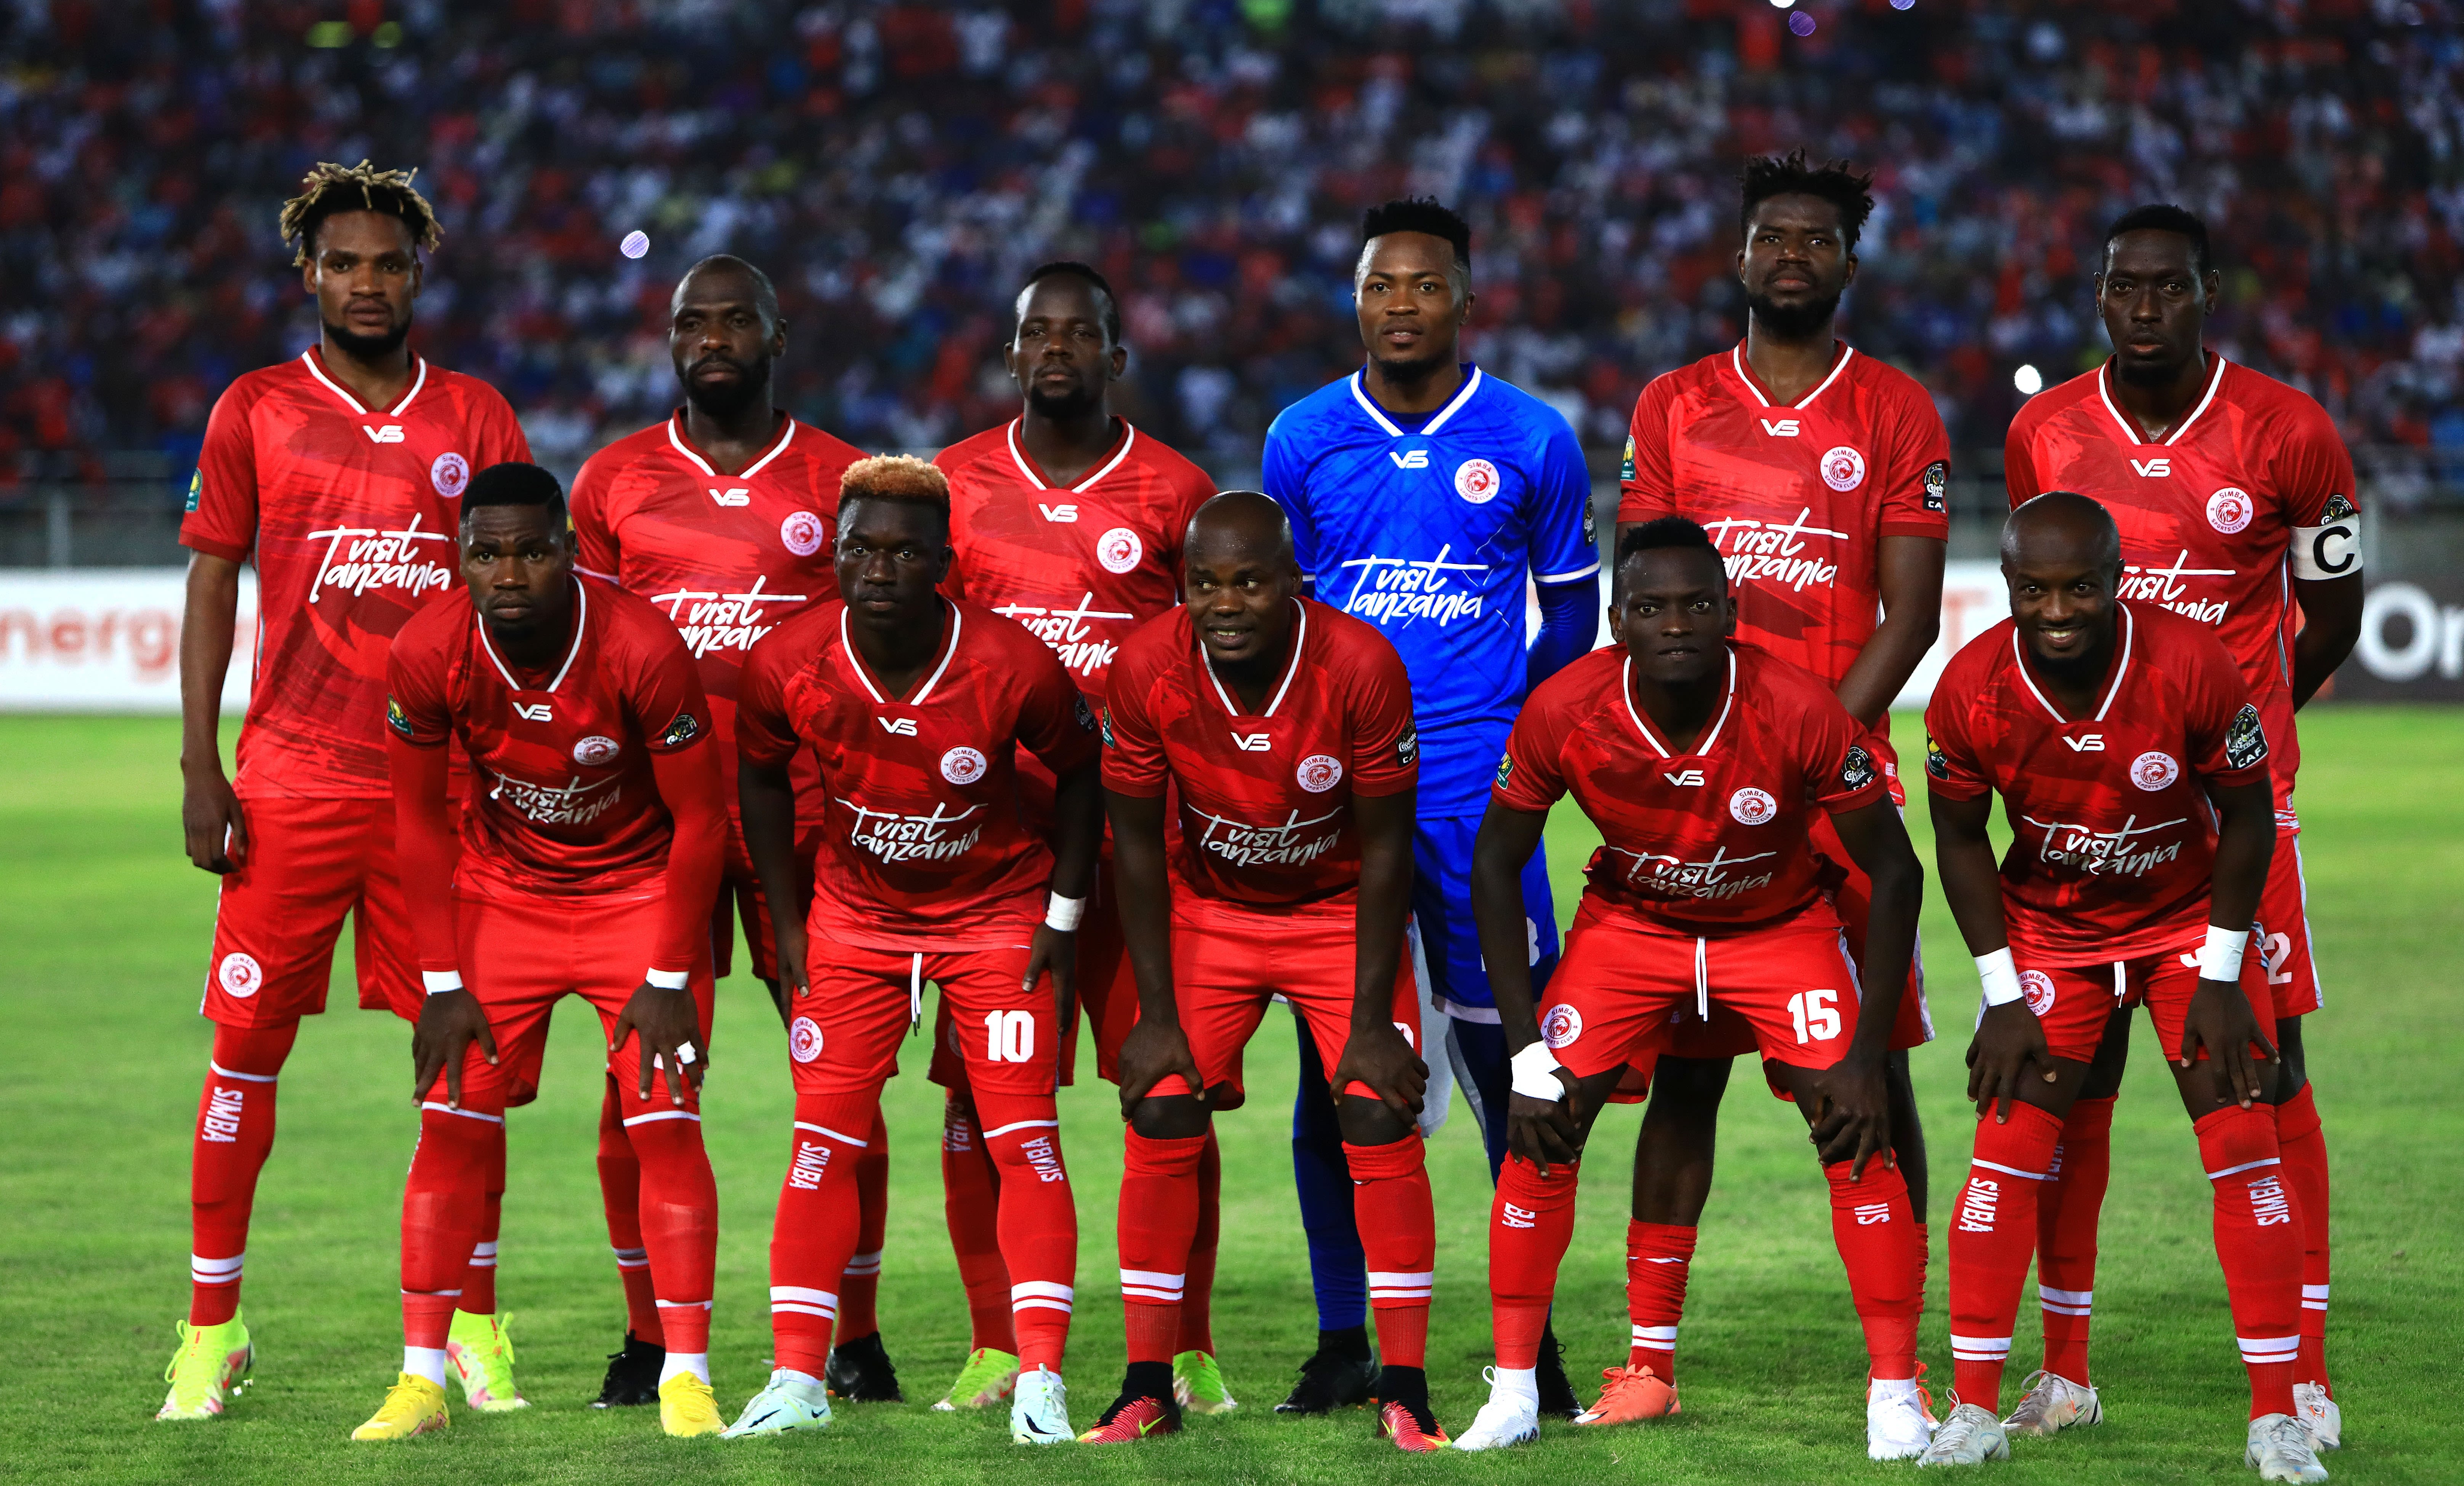 seventh-heaven-simba-roar-into-totalenergies-caf-cl-quarters-in-style